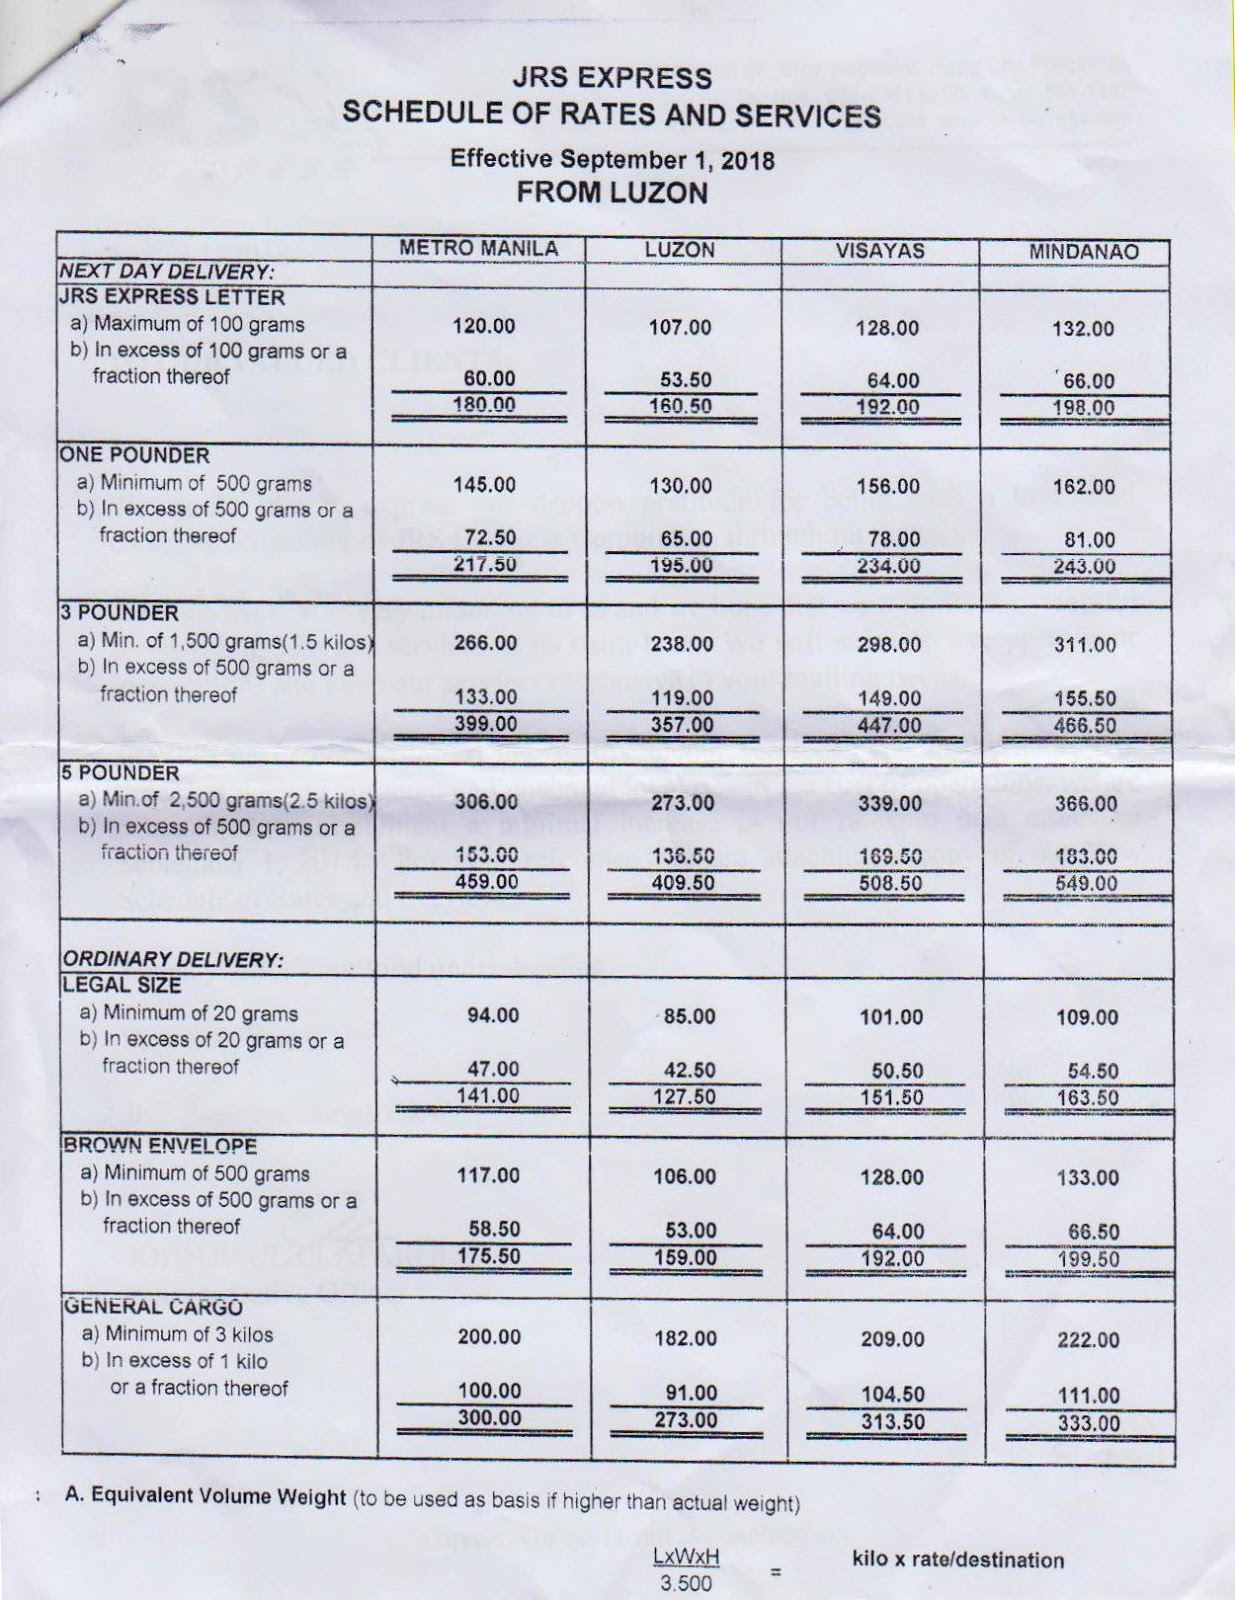 JRS Express Rates from Luzon